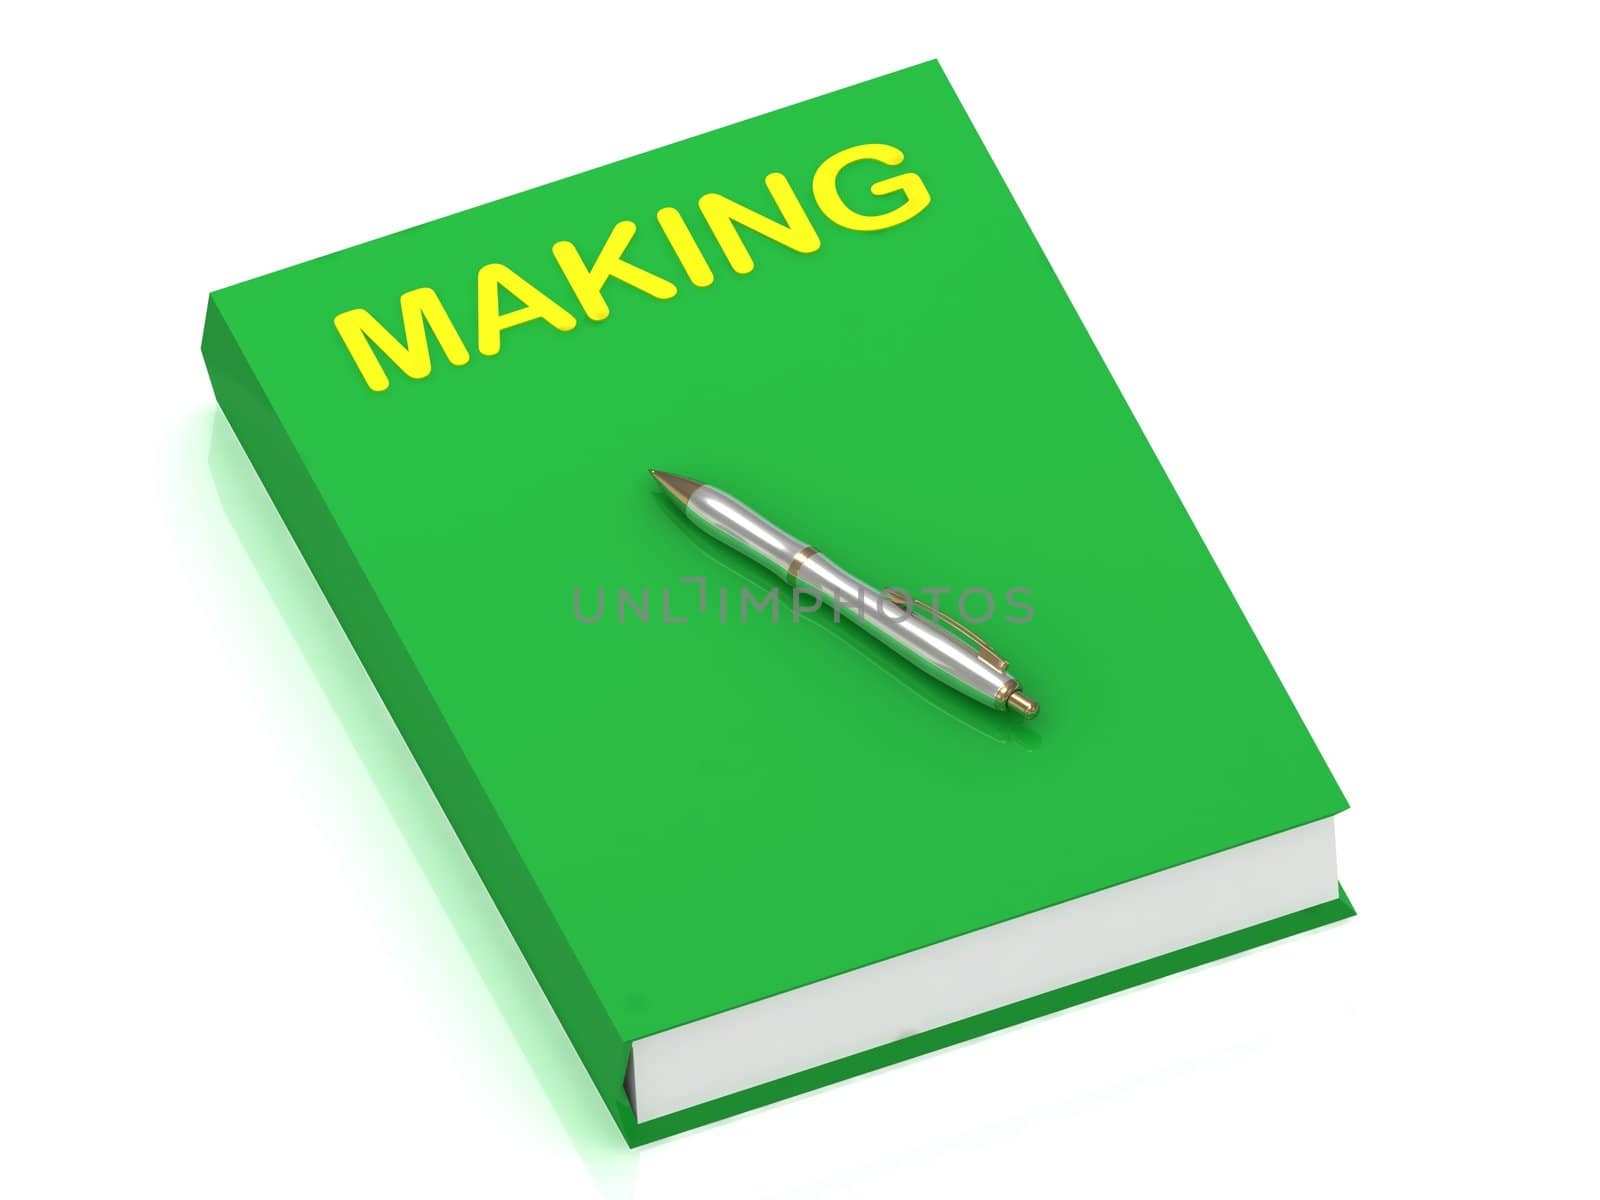 MAKING name on cover book by GreenMost